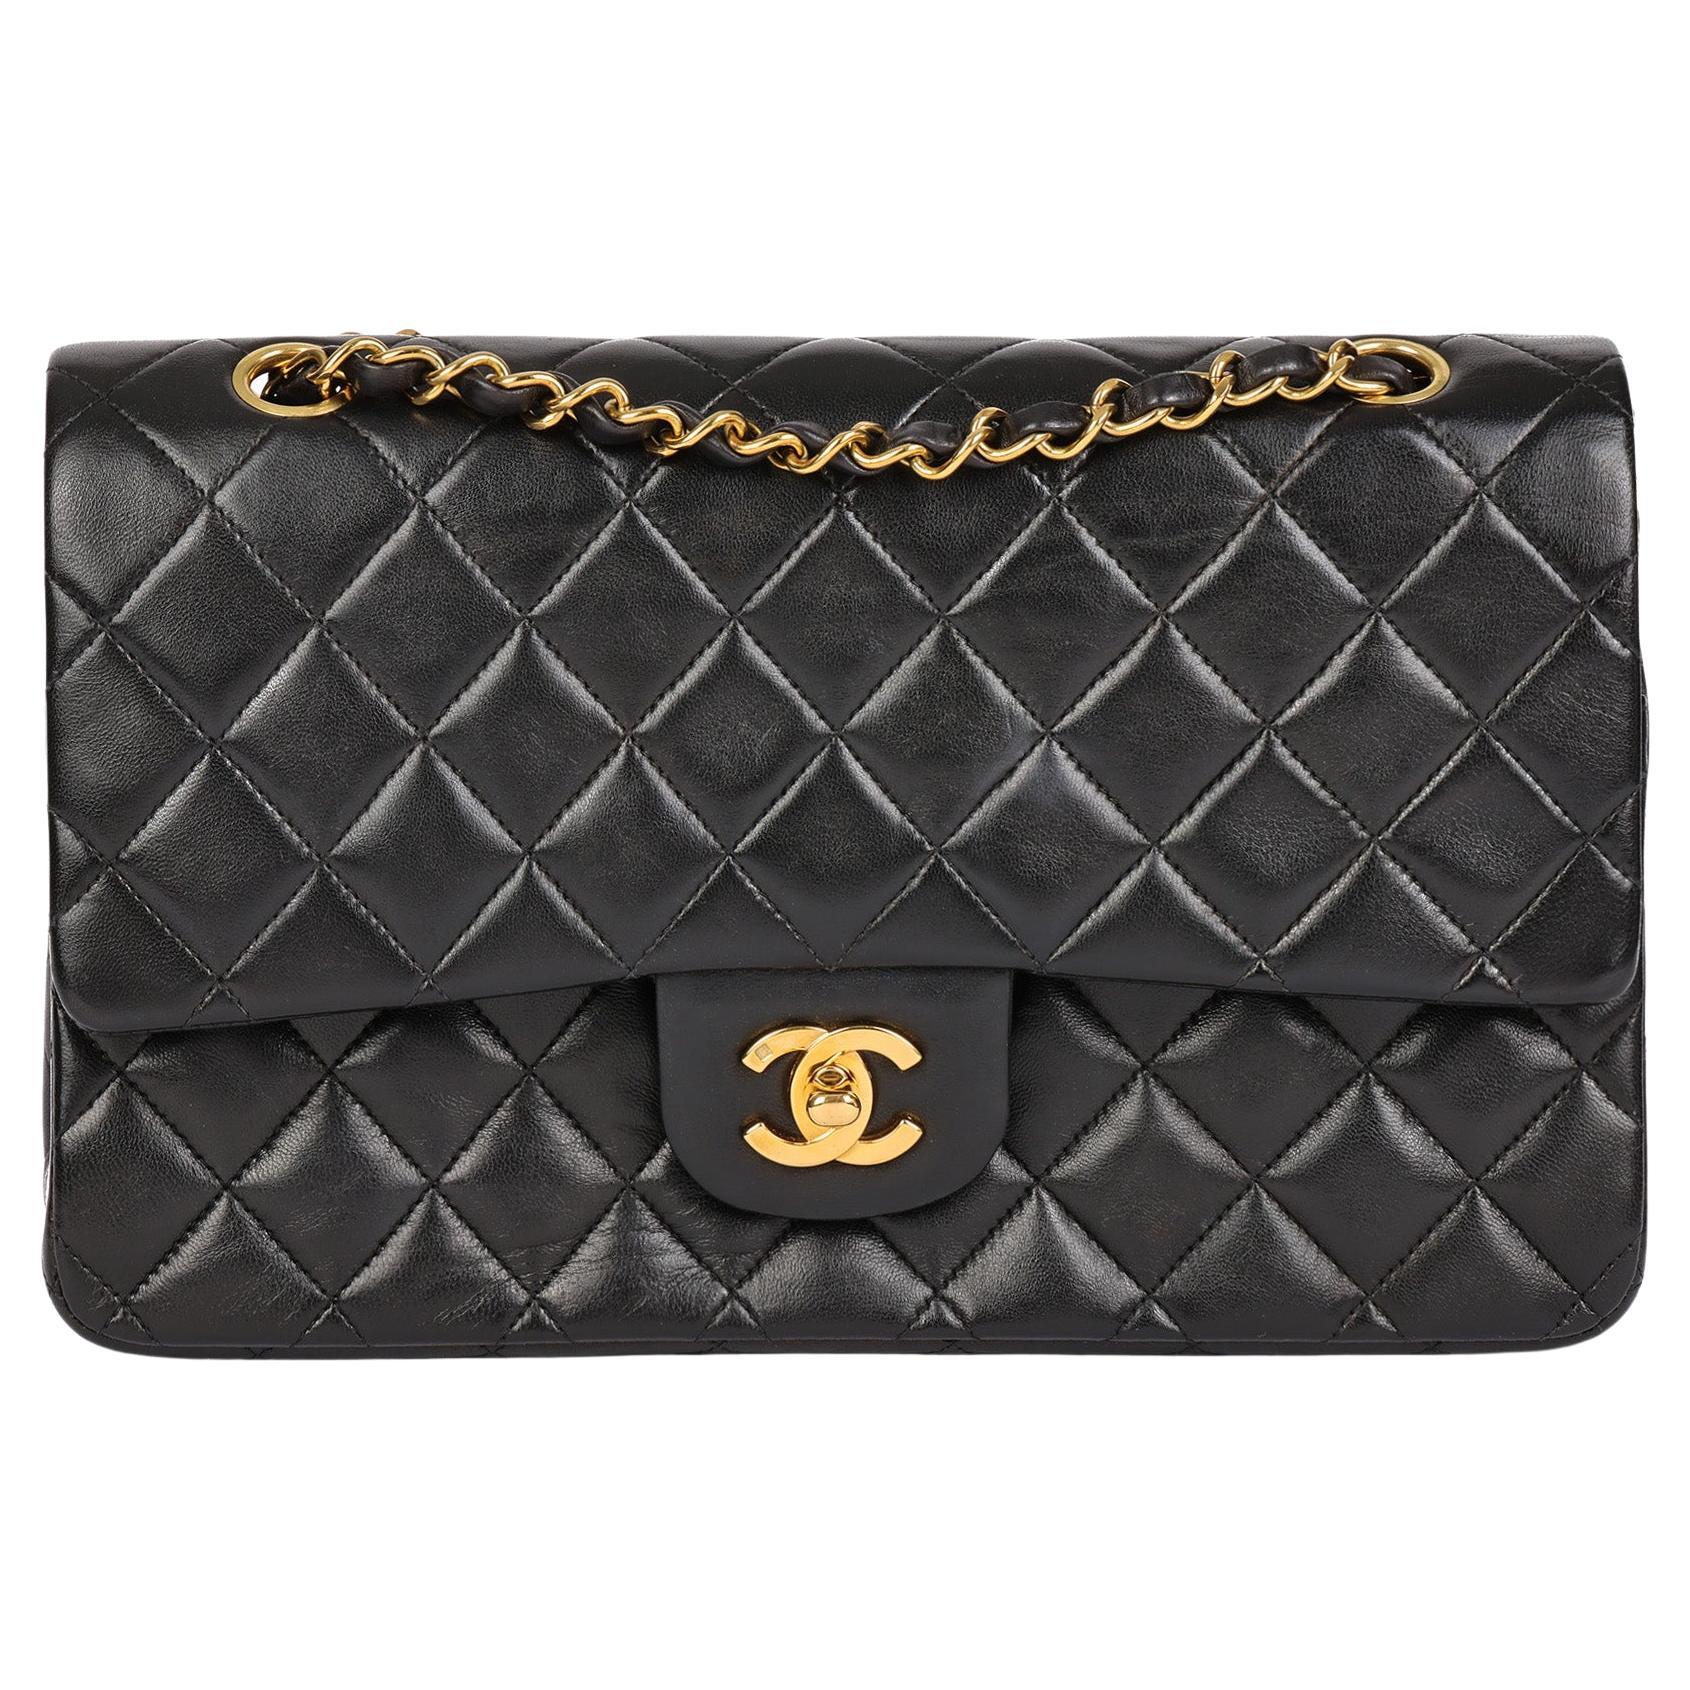 CHANEL Black Quilted Lambskin Vintage Medium Classic Double Flap Bag 